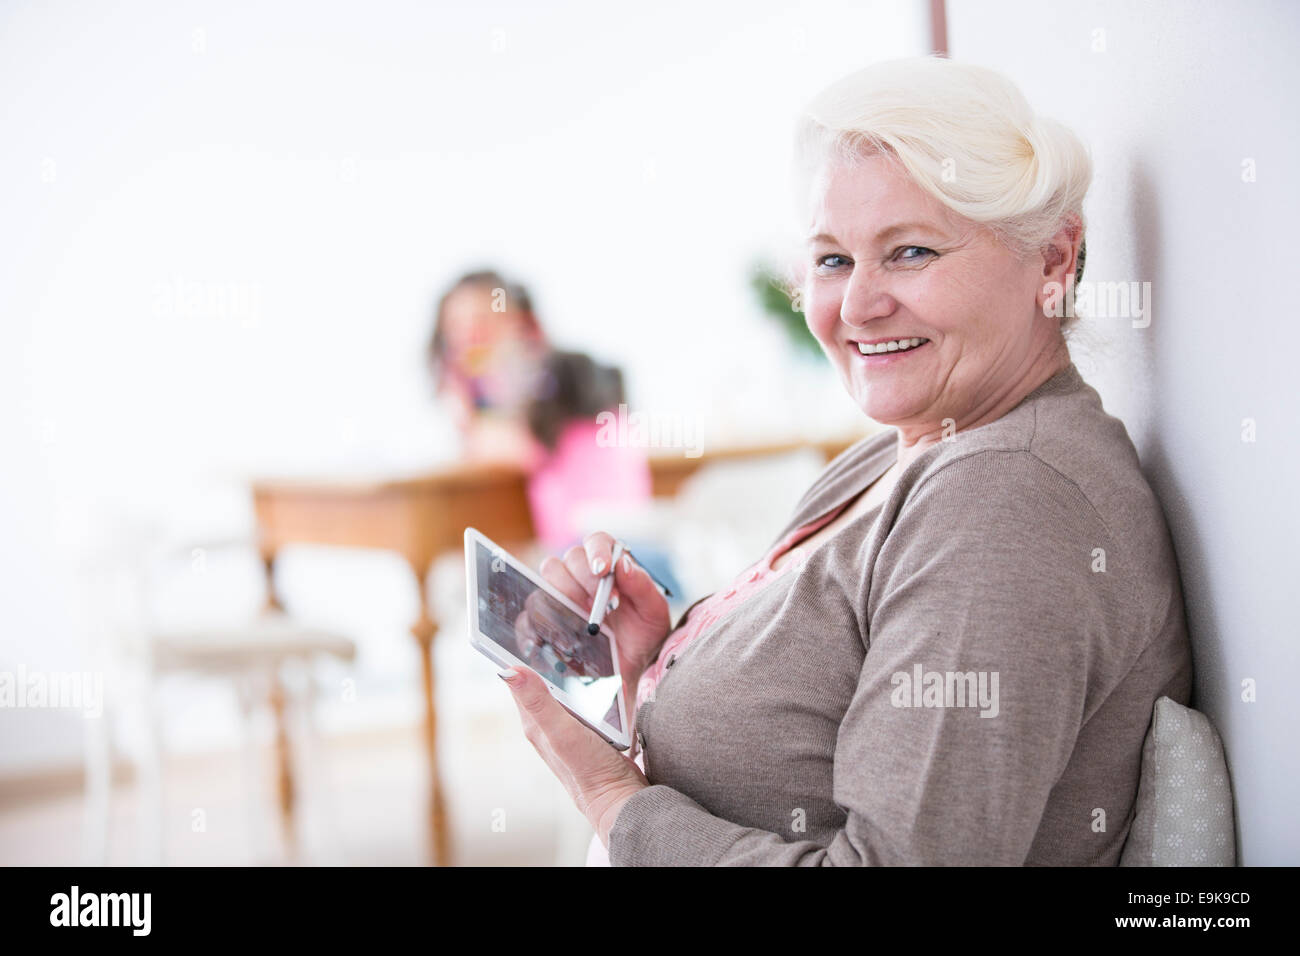 Portrait of happy senior woman using digital tablet with stylus at home Stock Photo